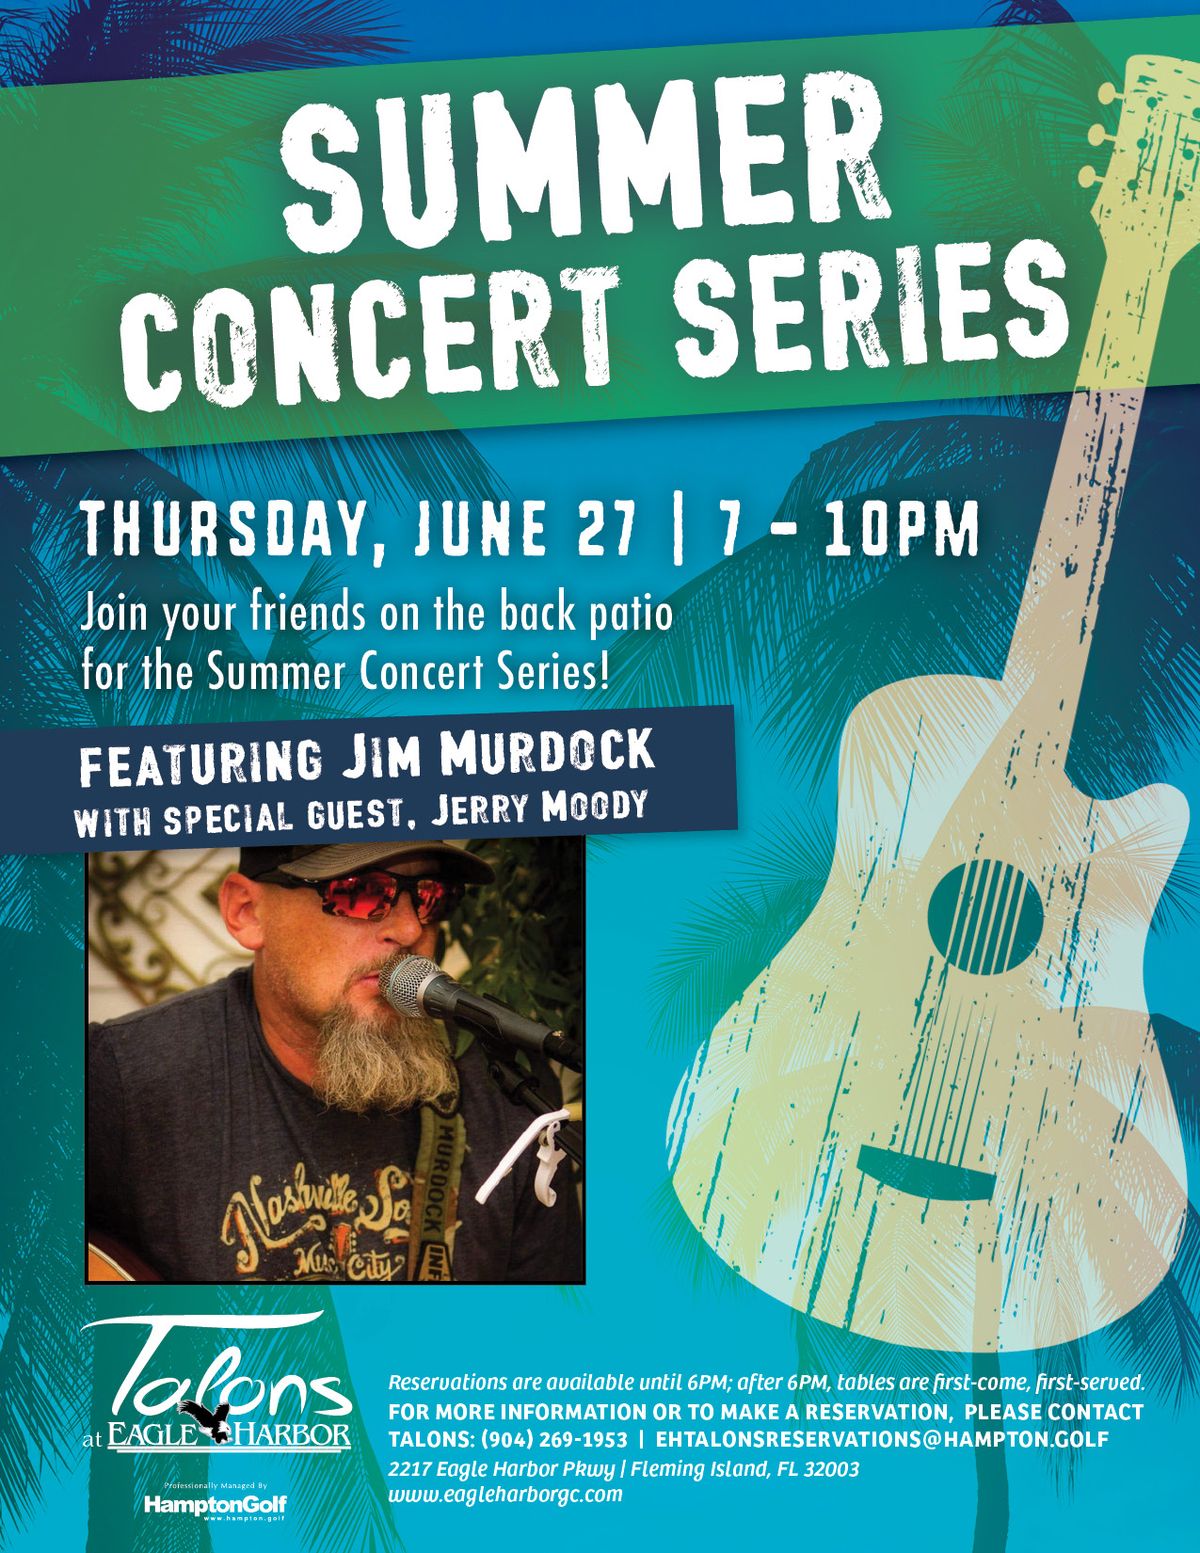 Summer Concert Series: Jim Murdock with Special Guest, Jerry Moody